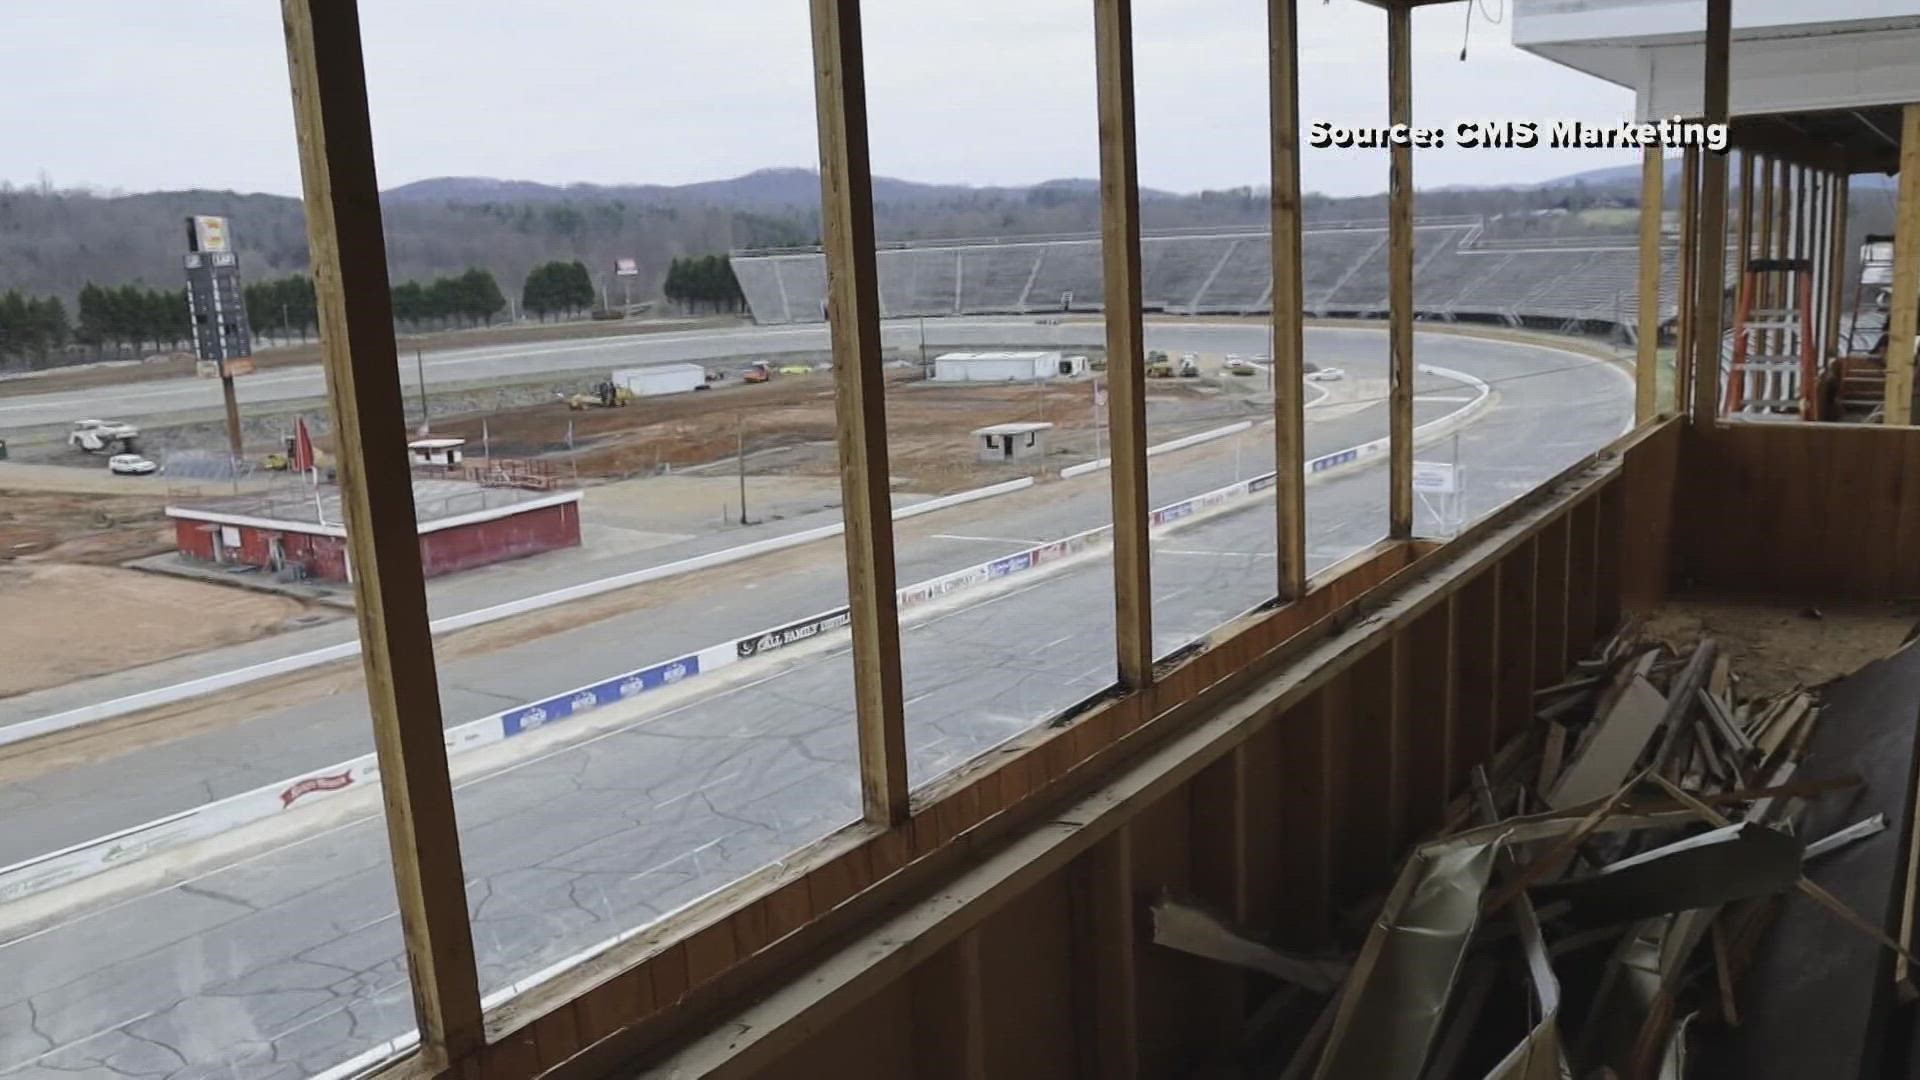 The historic track will host its first NASCAR event in decades in May 2023.